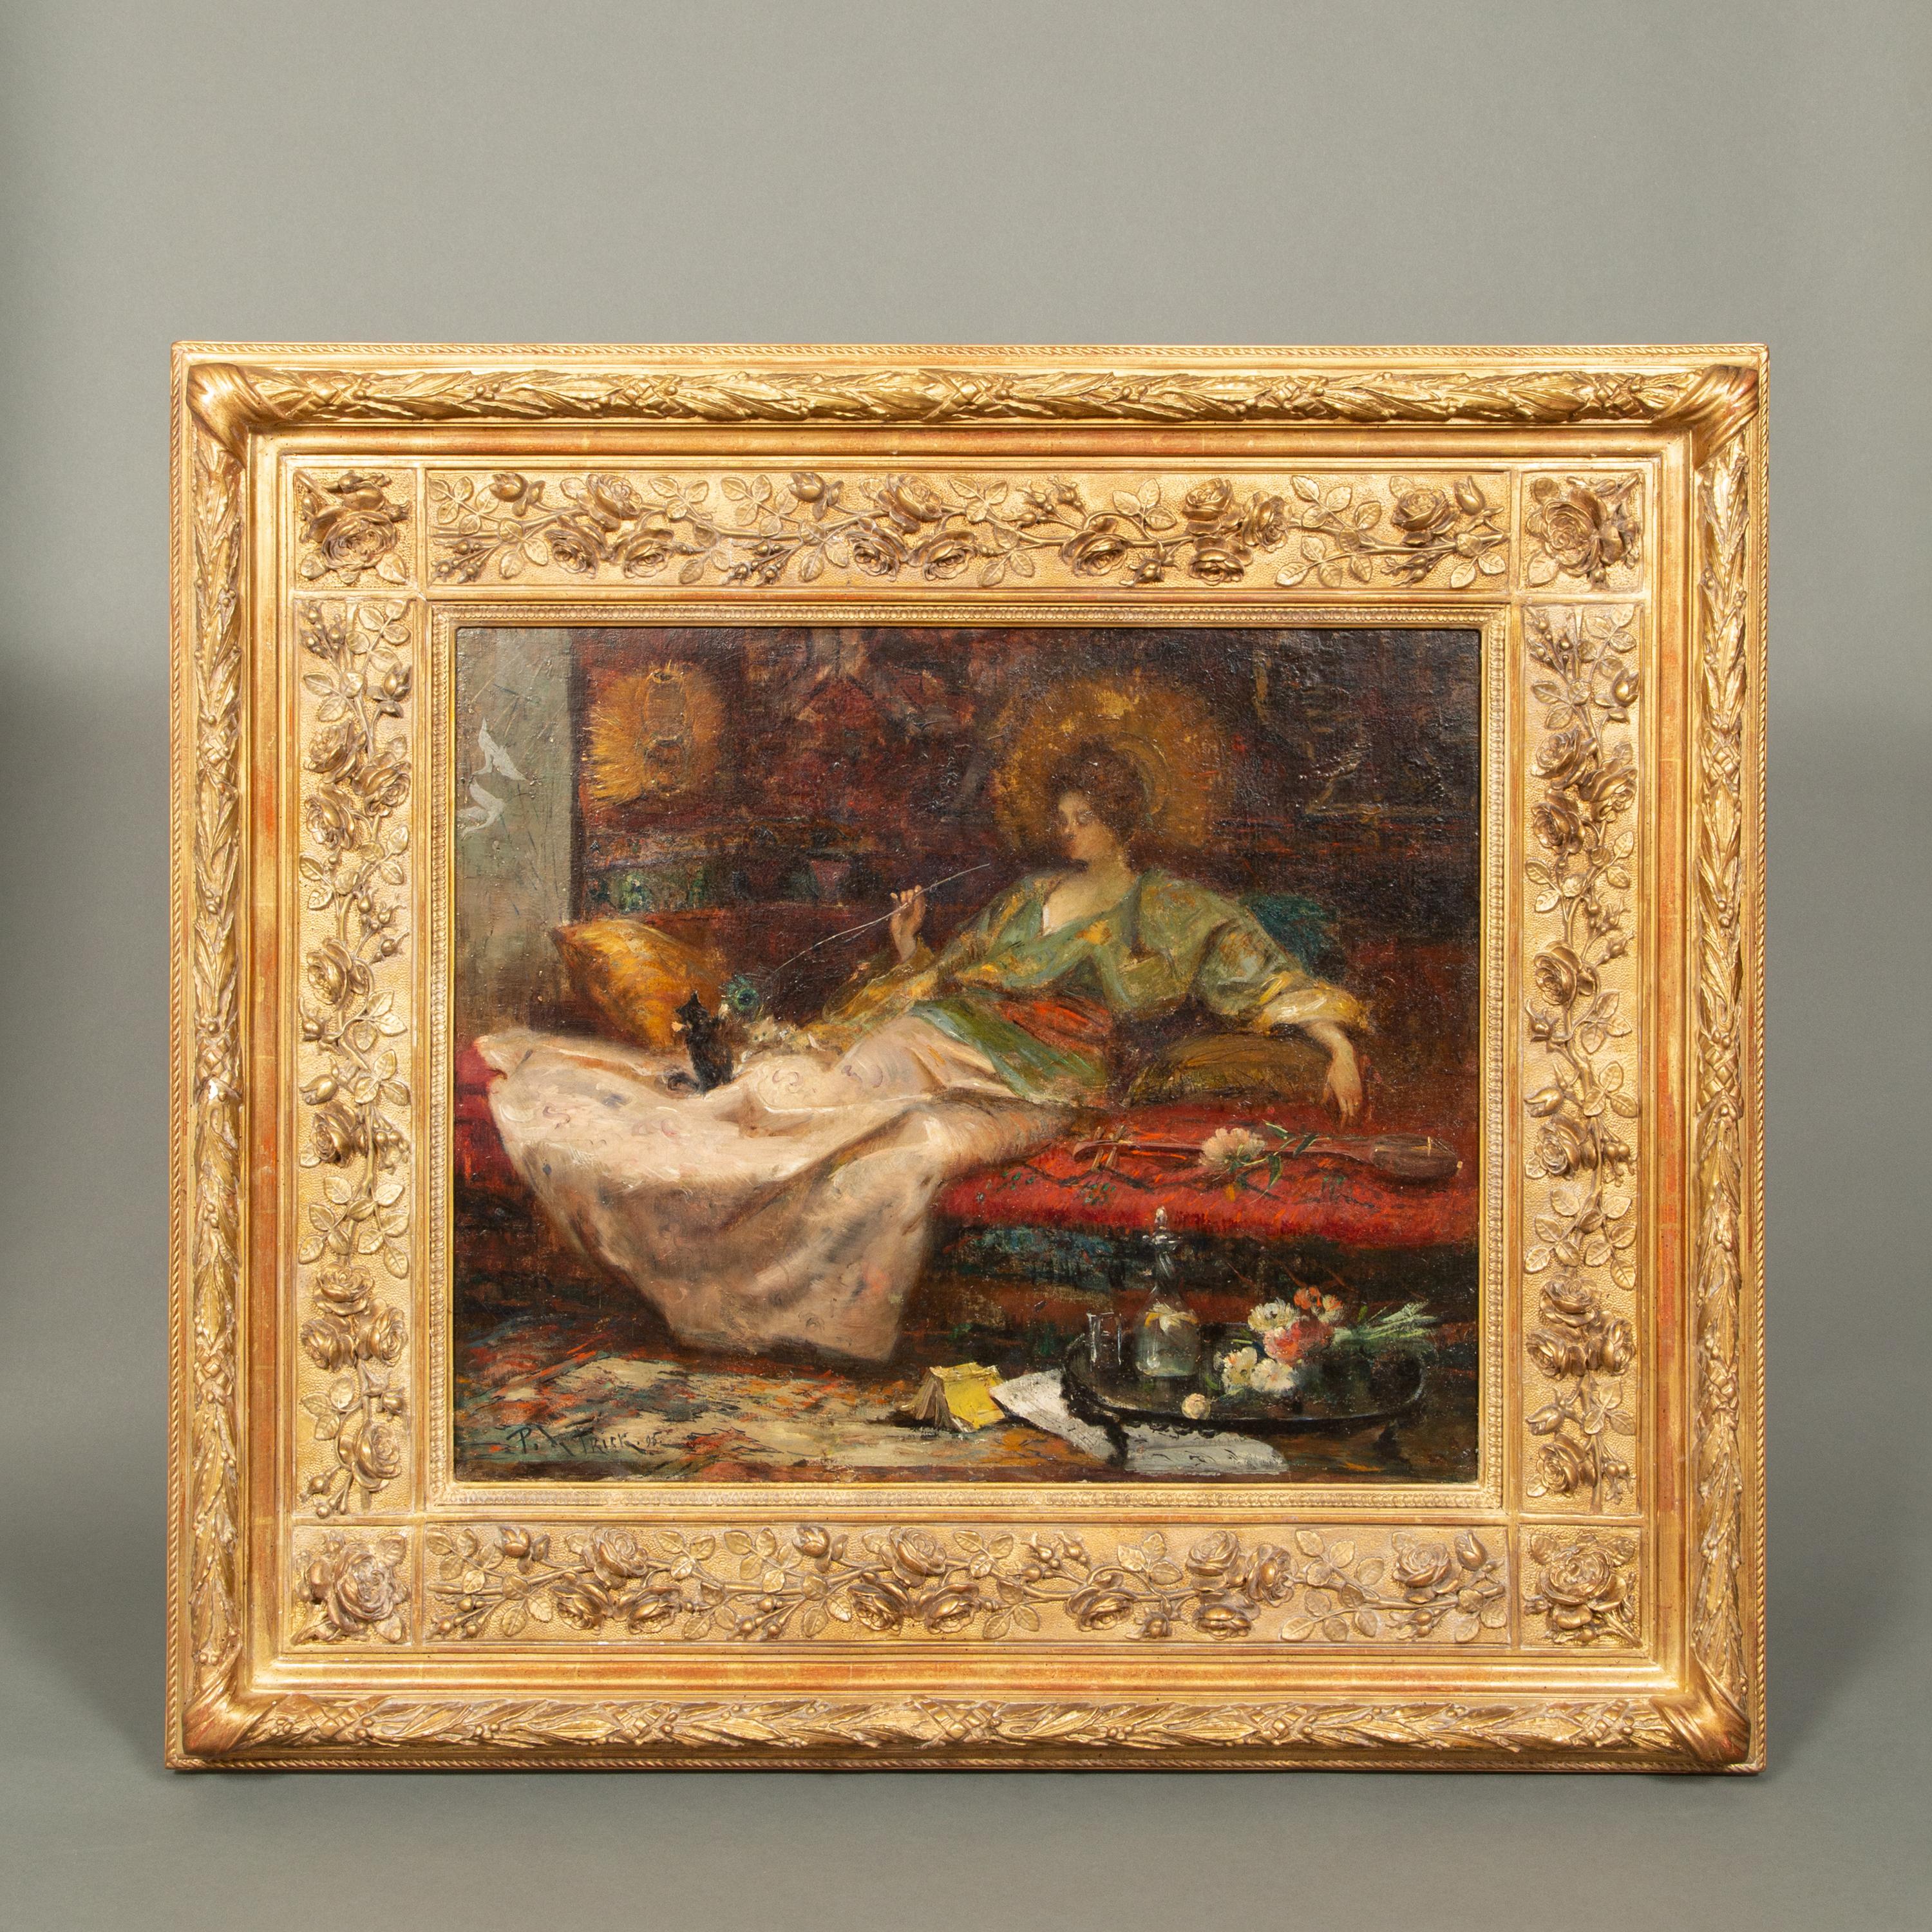 “A Lady playing with a Cat” by Paul De Frick (1864 - Paris - 1935), dated 1896 For Sale 7